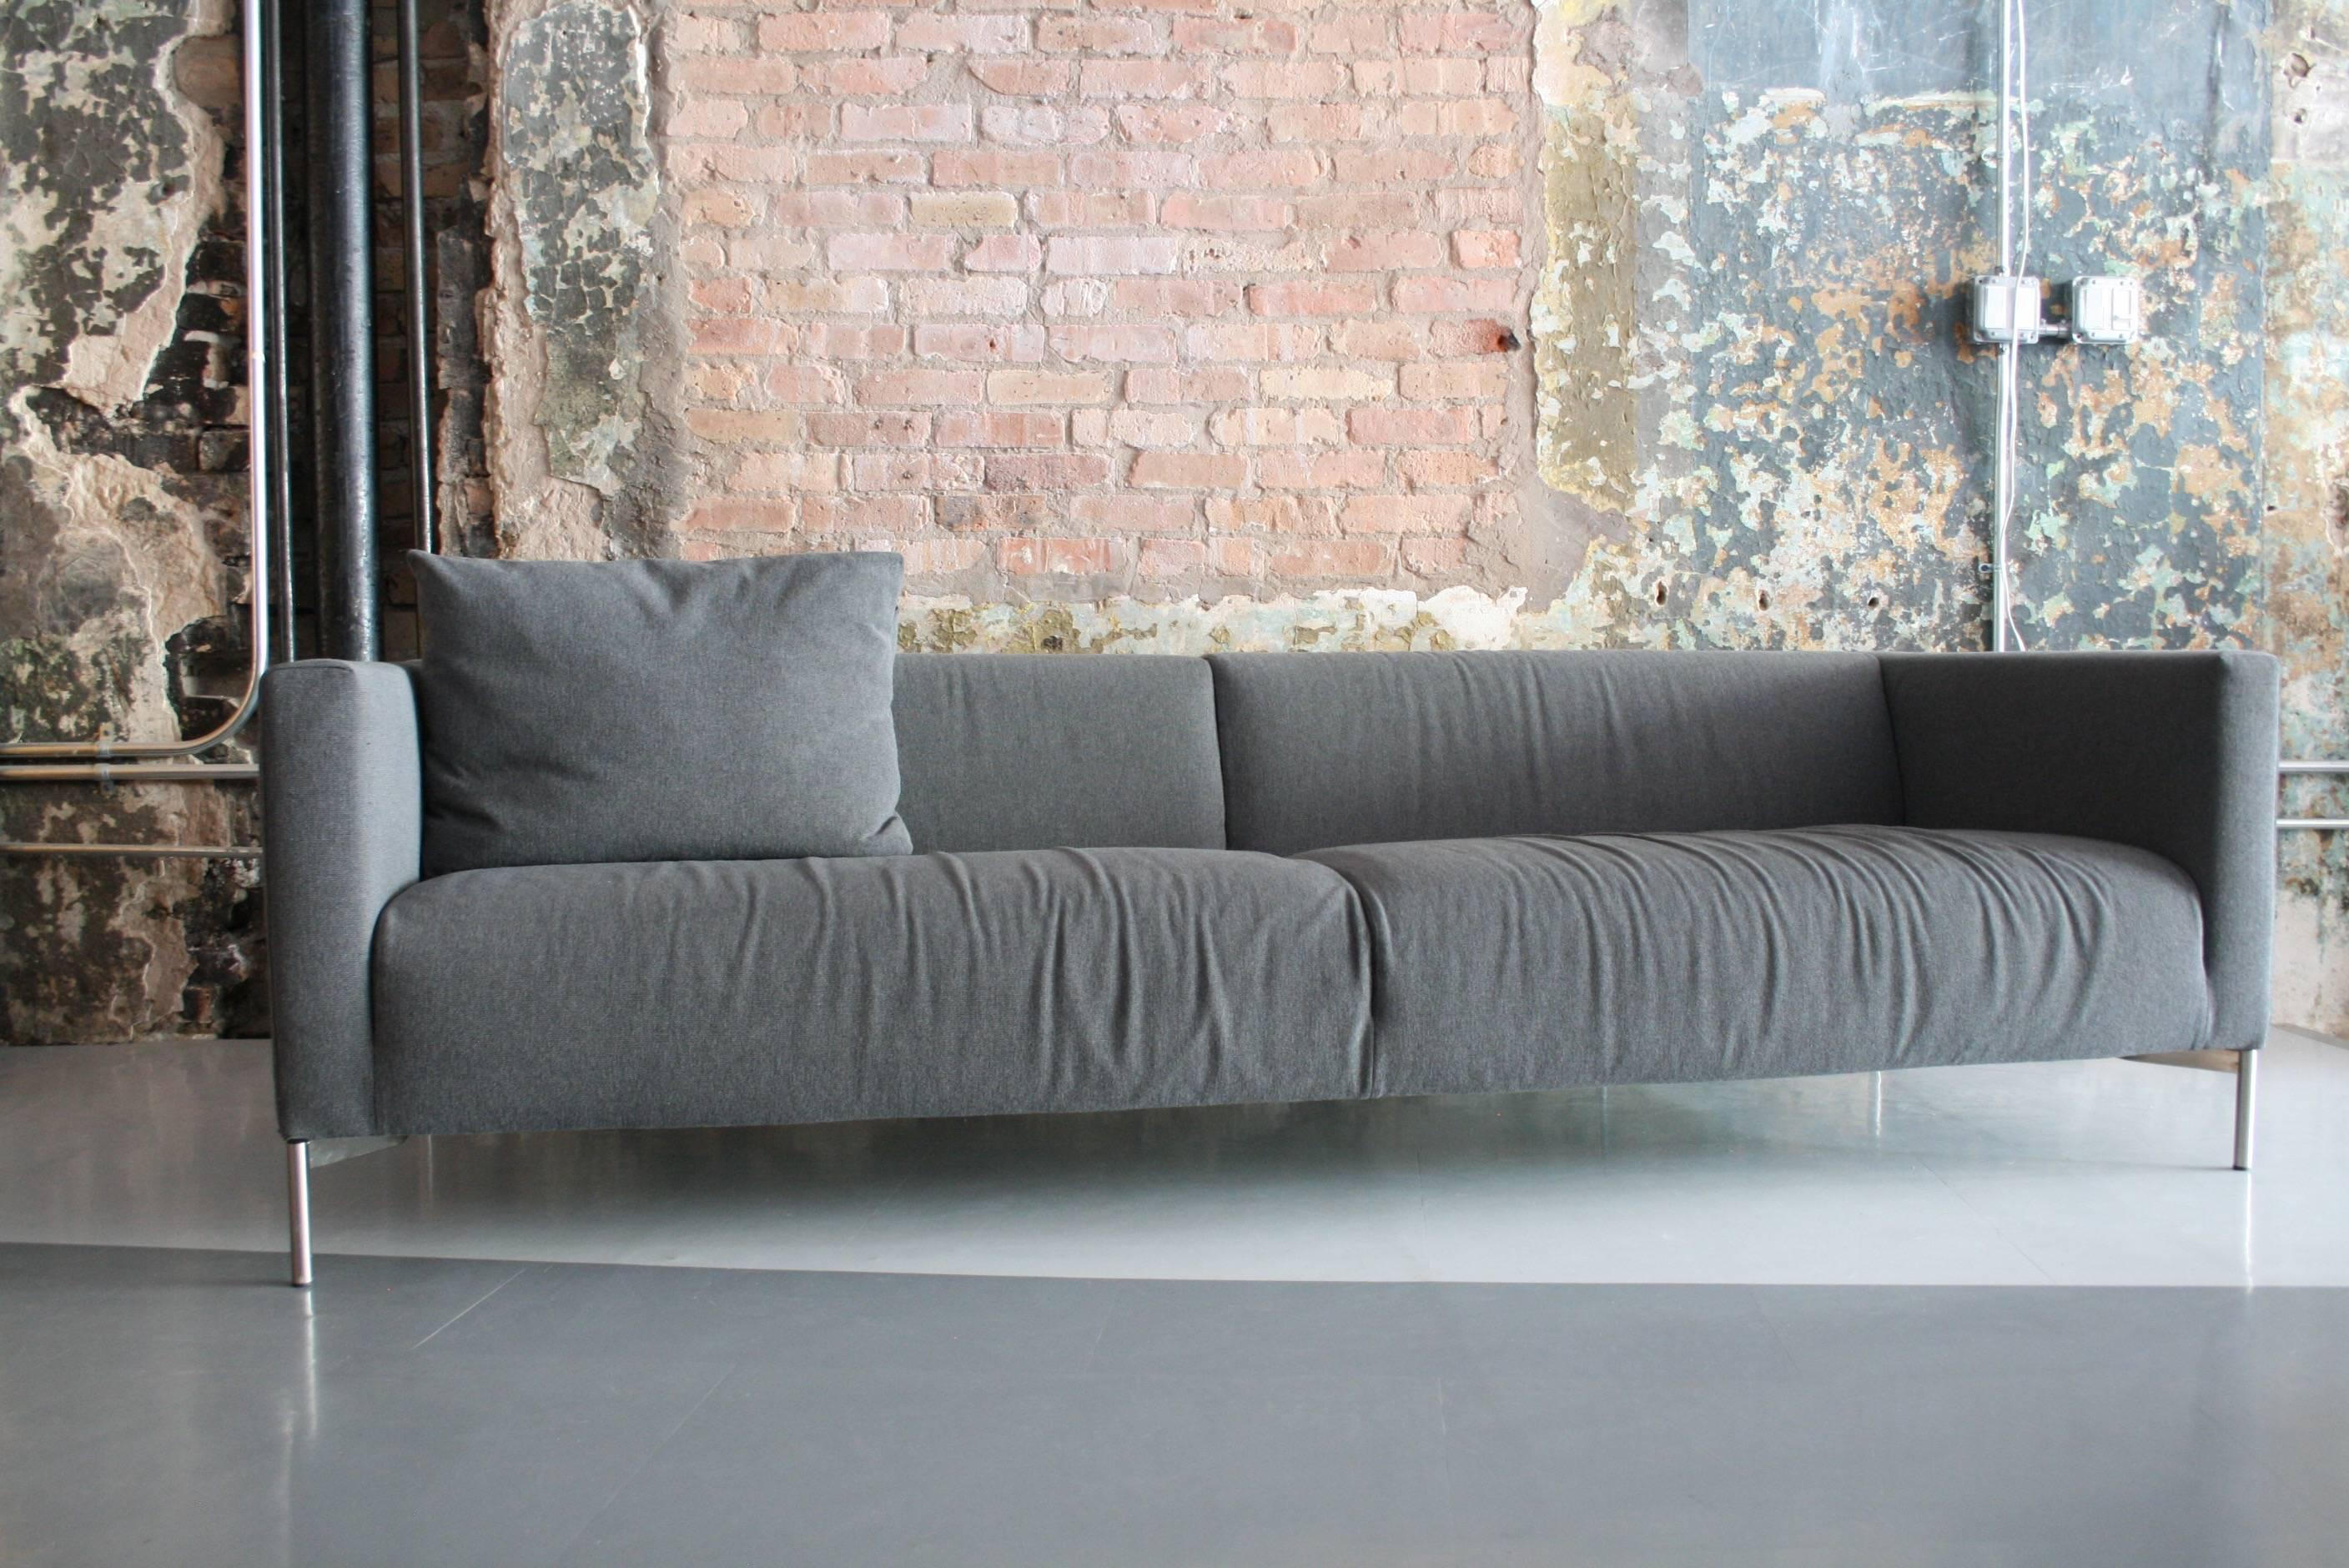 Piero Lissoni twin sofa for Living Divani Italy in gray Maharam wool upholstery. The sofa is very comfortable and in great condition. This model was designed in 2000 by Piero Lissoni.